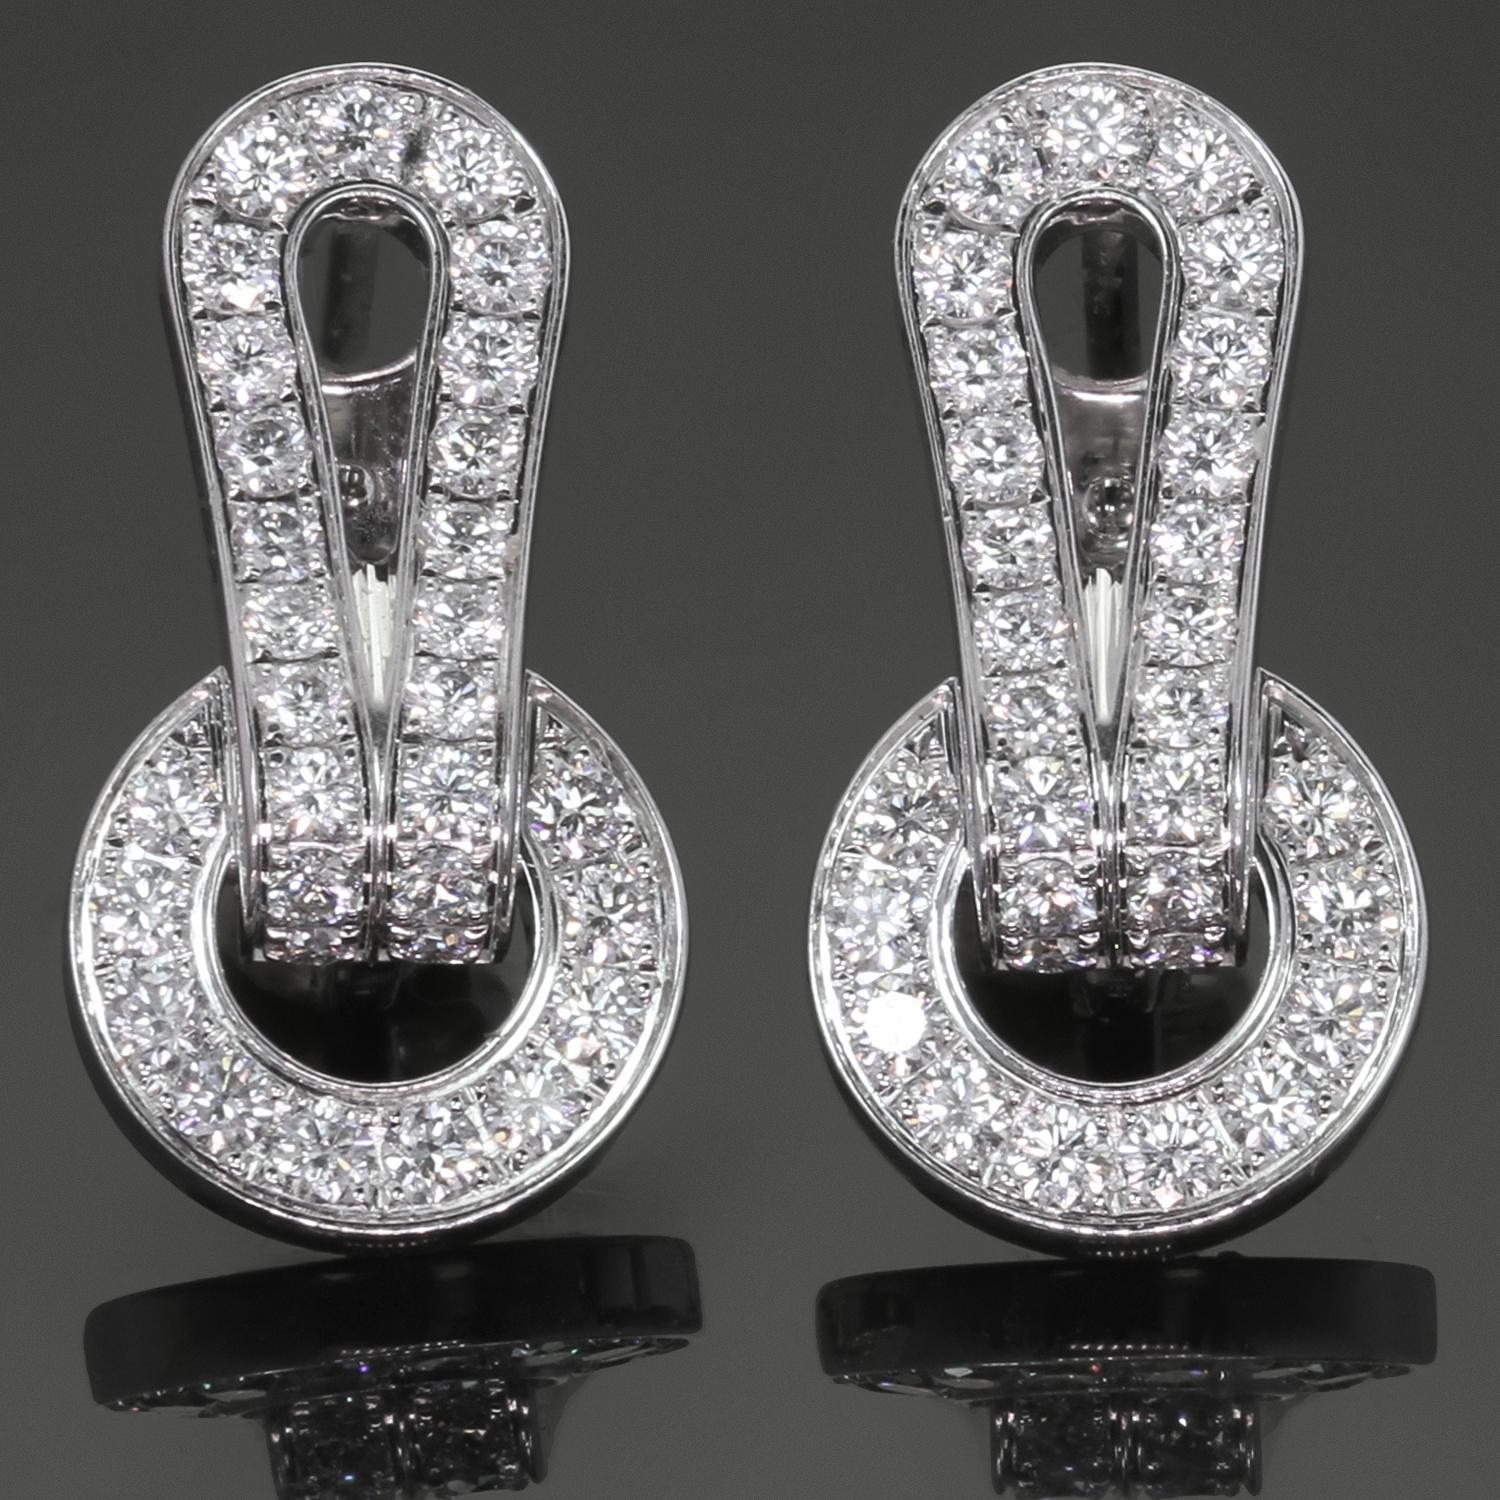 These gorgeous Cartier earrings from the classic Agrafe collection is crafted in 18k white gold and set with about 52 brilliant-cut round diamonds. Made in France circa 2000s. Measurements: 0.43